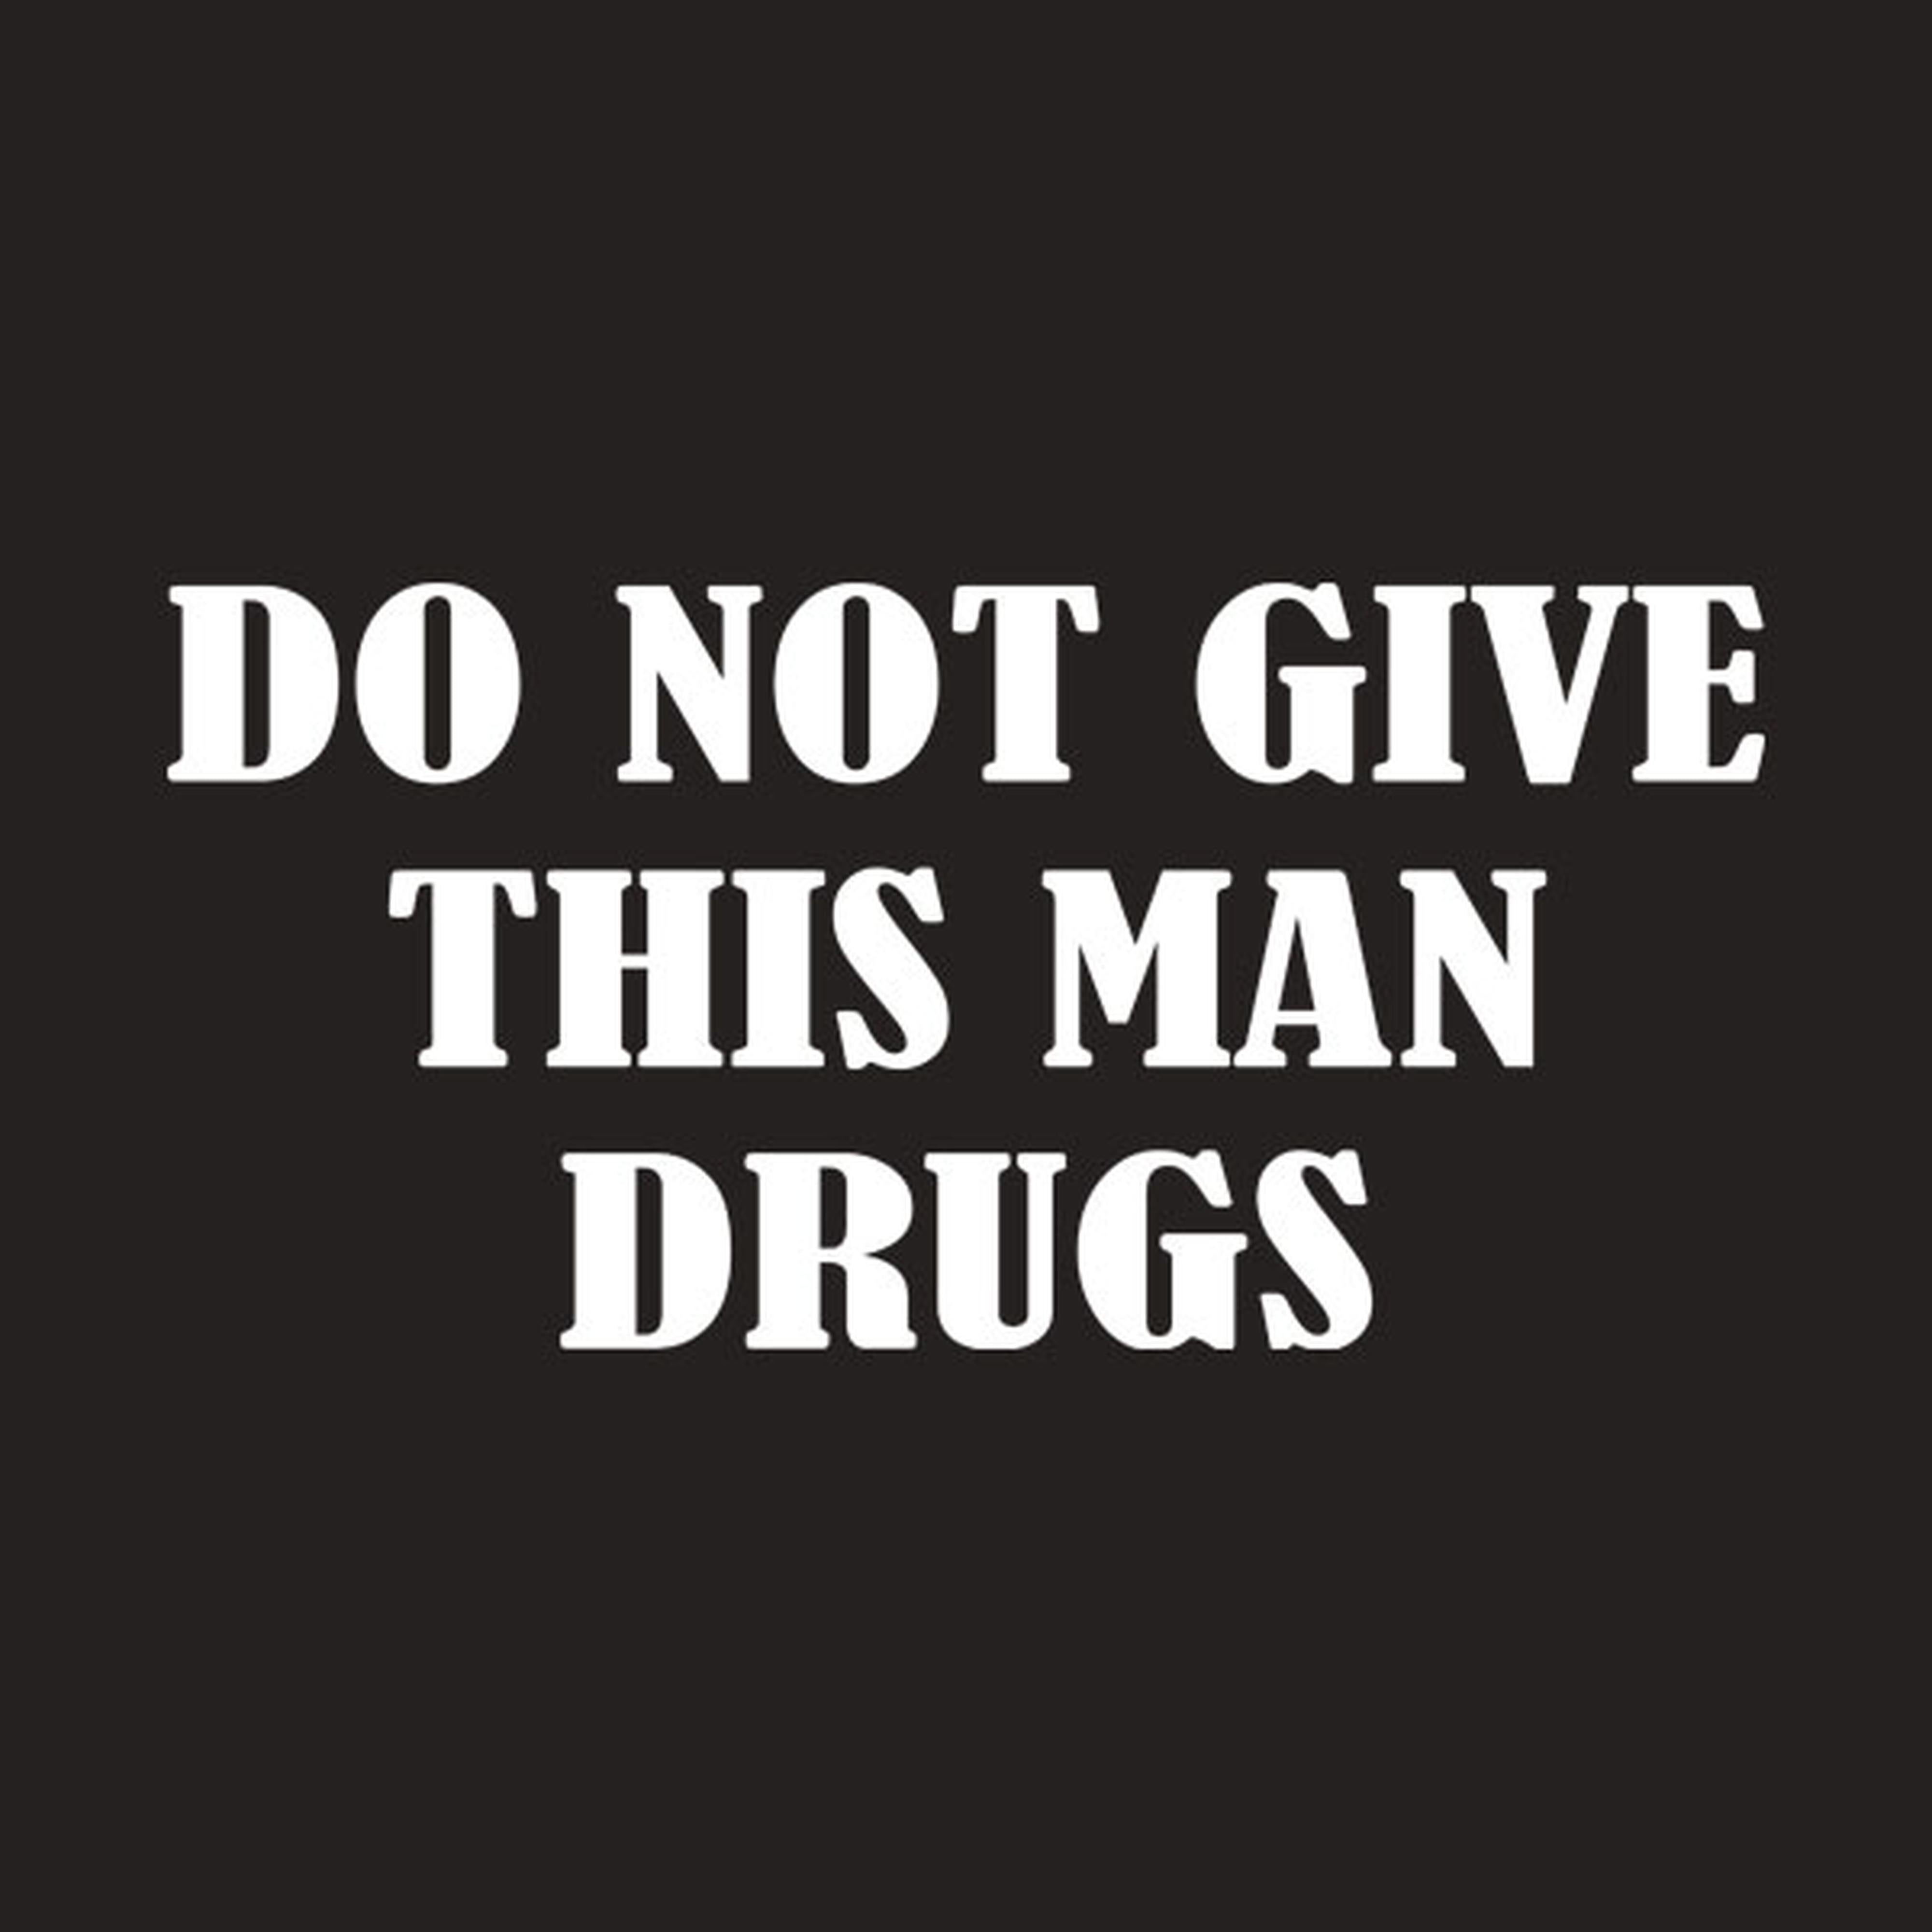 Do not give this man drugs - T-shirt